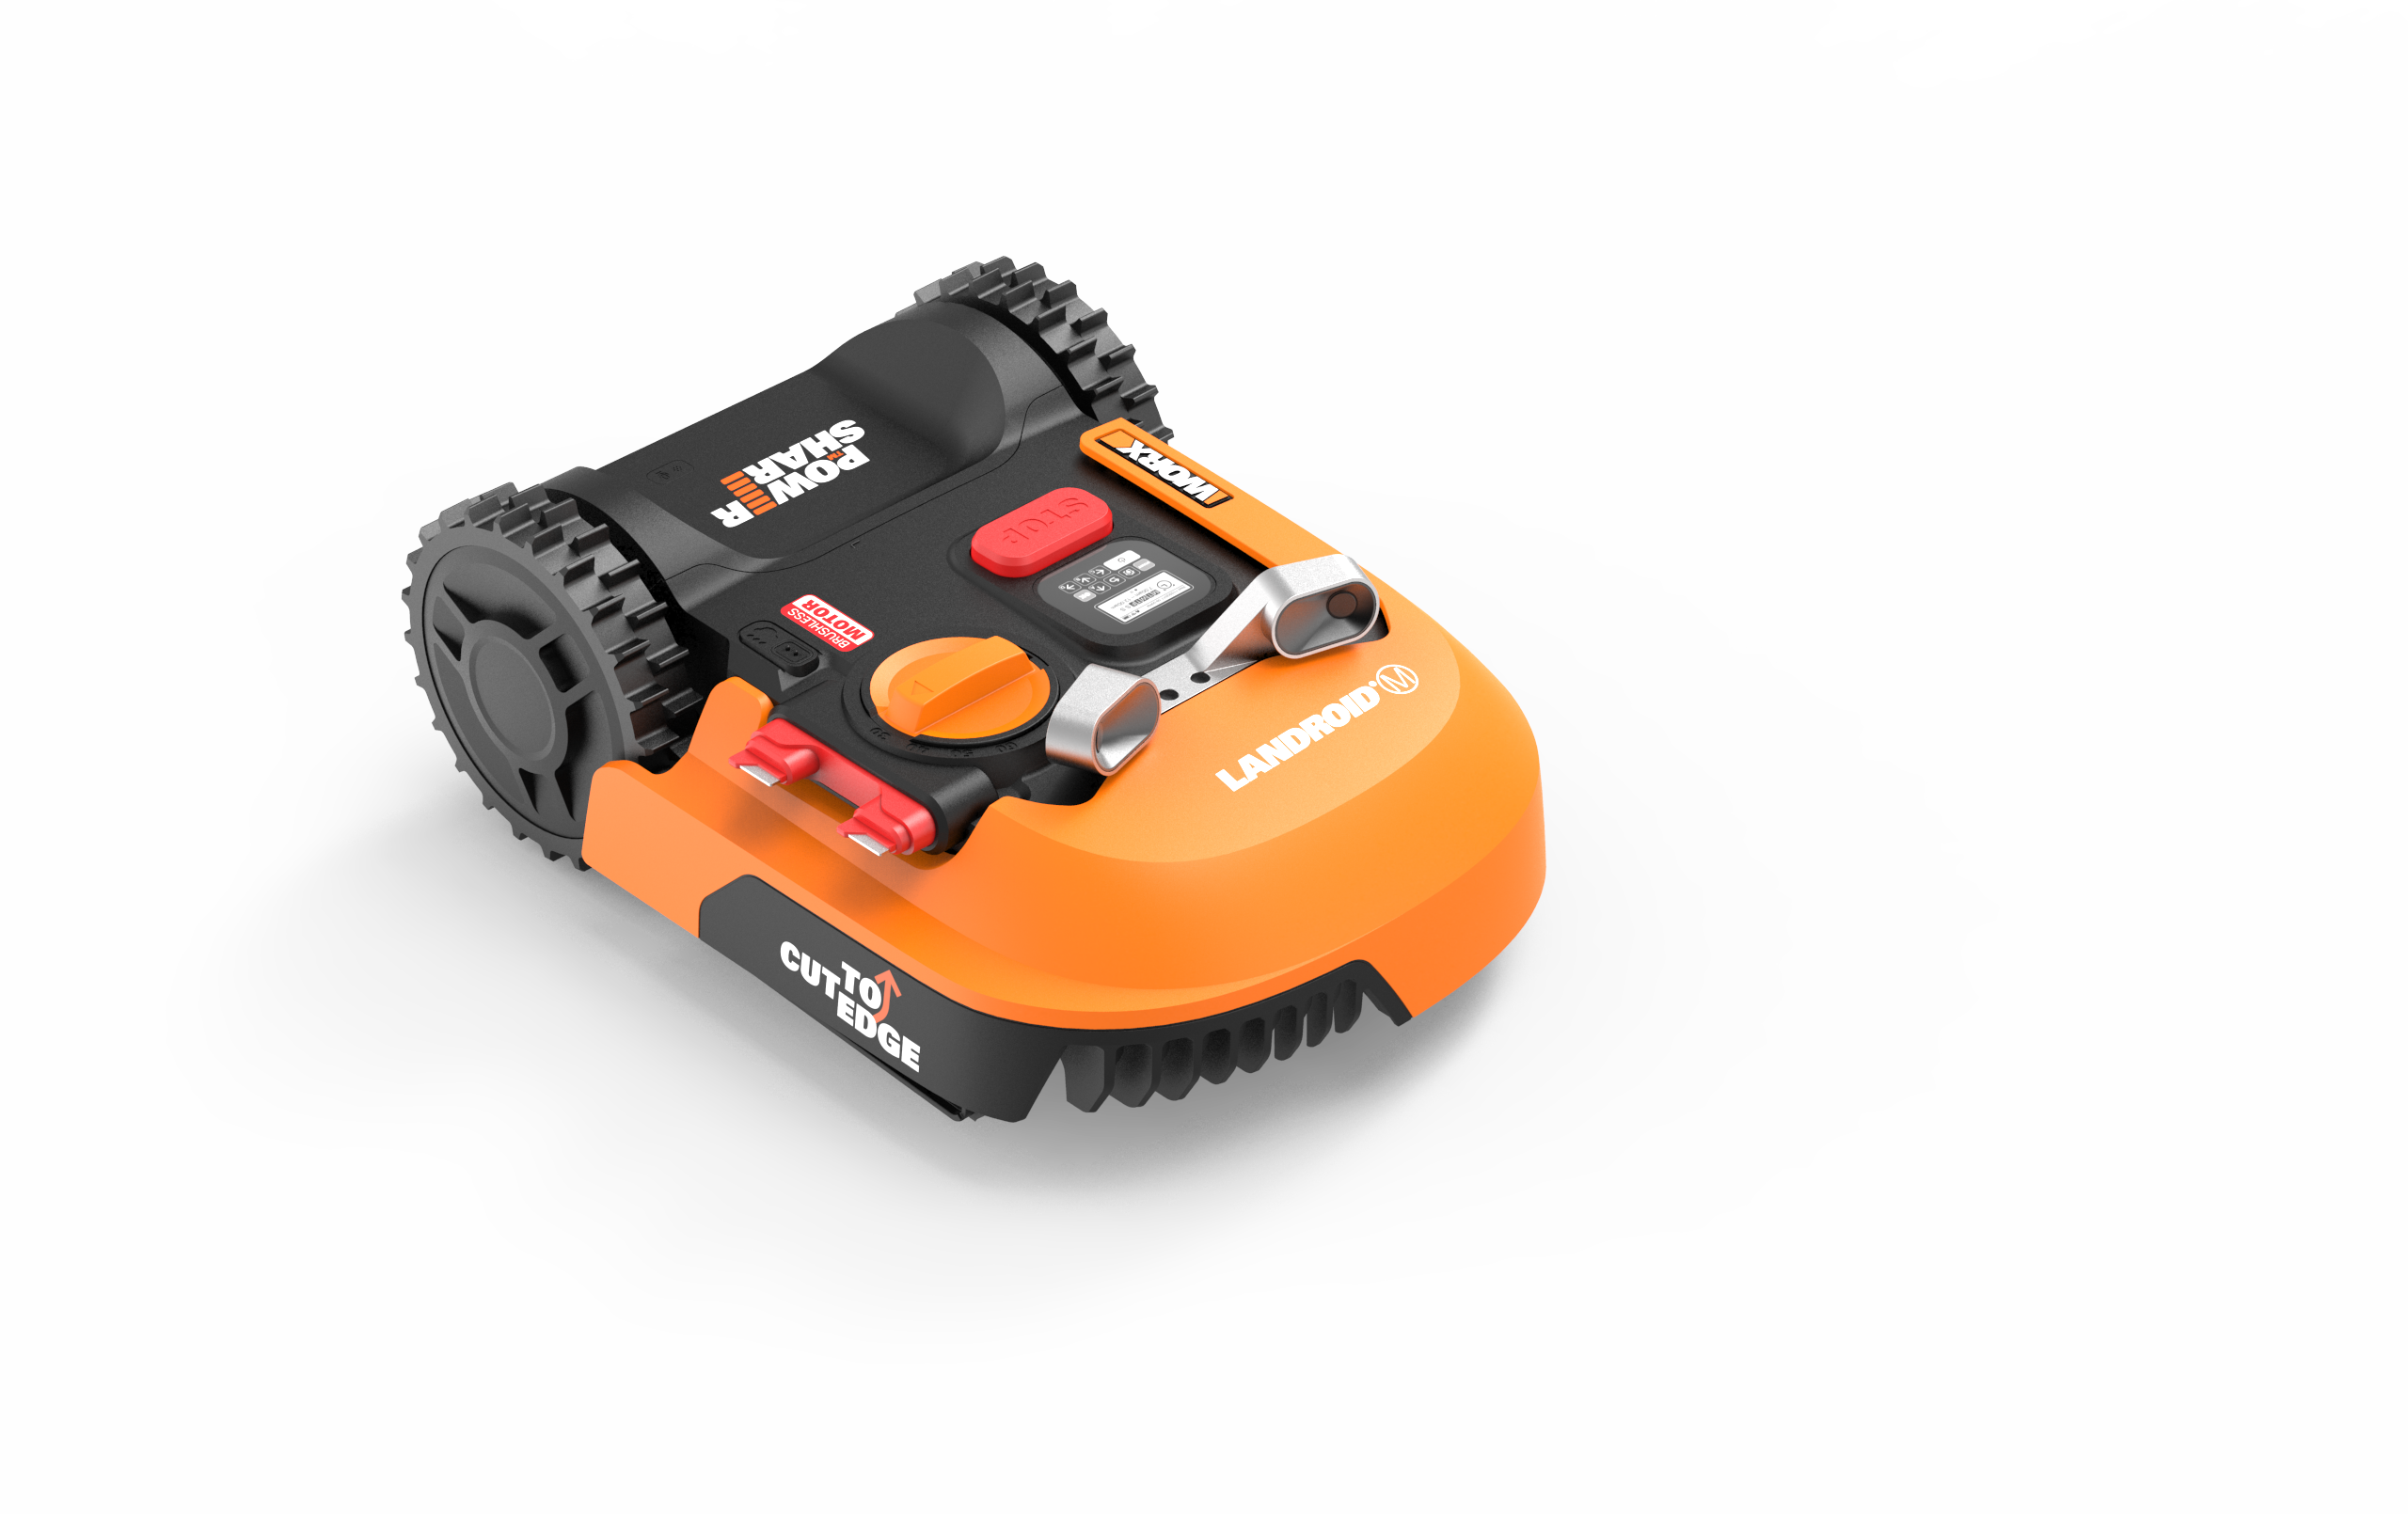 New WORX Landroid M Robotic Mower Is Loaded With The Latest Technological Features